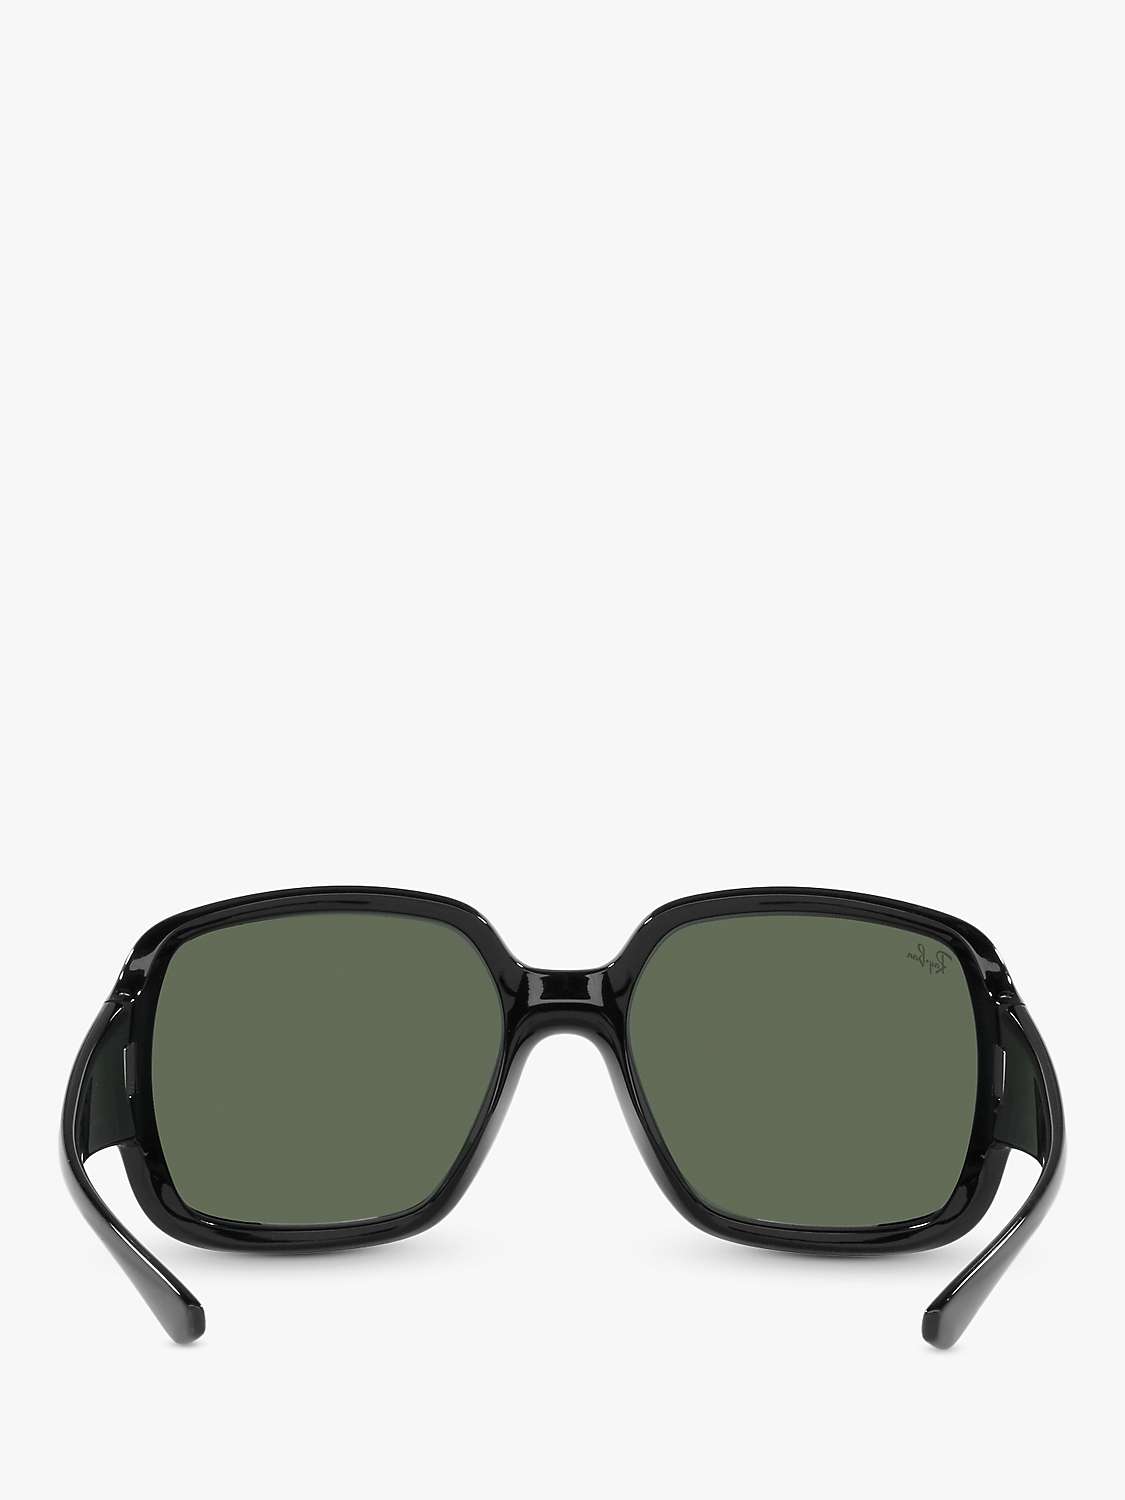 Buy Ray-Ban RB4347 Unisex Square Sunglasses, Black/Green Classic Online at johnlewis.com